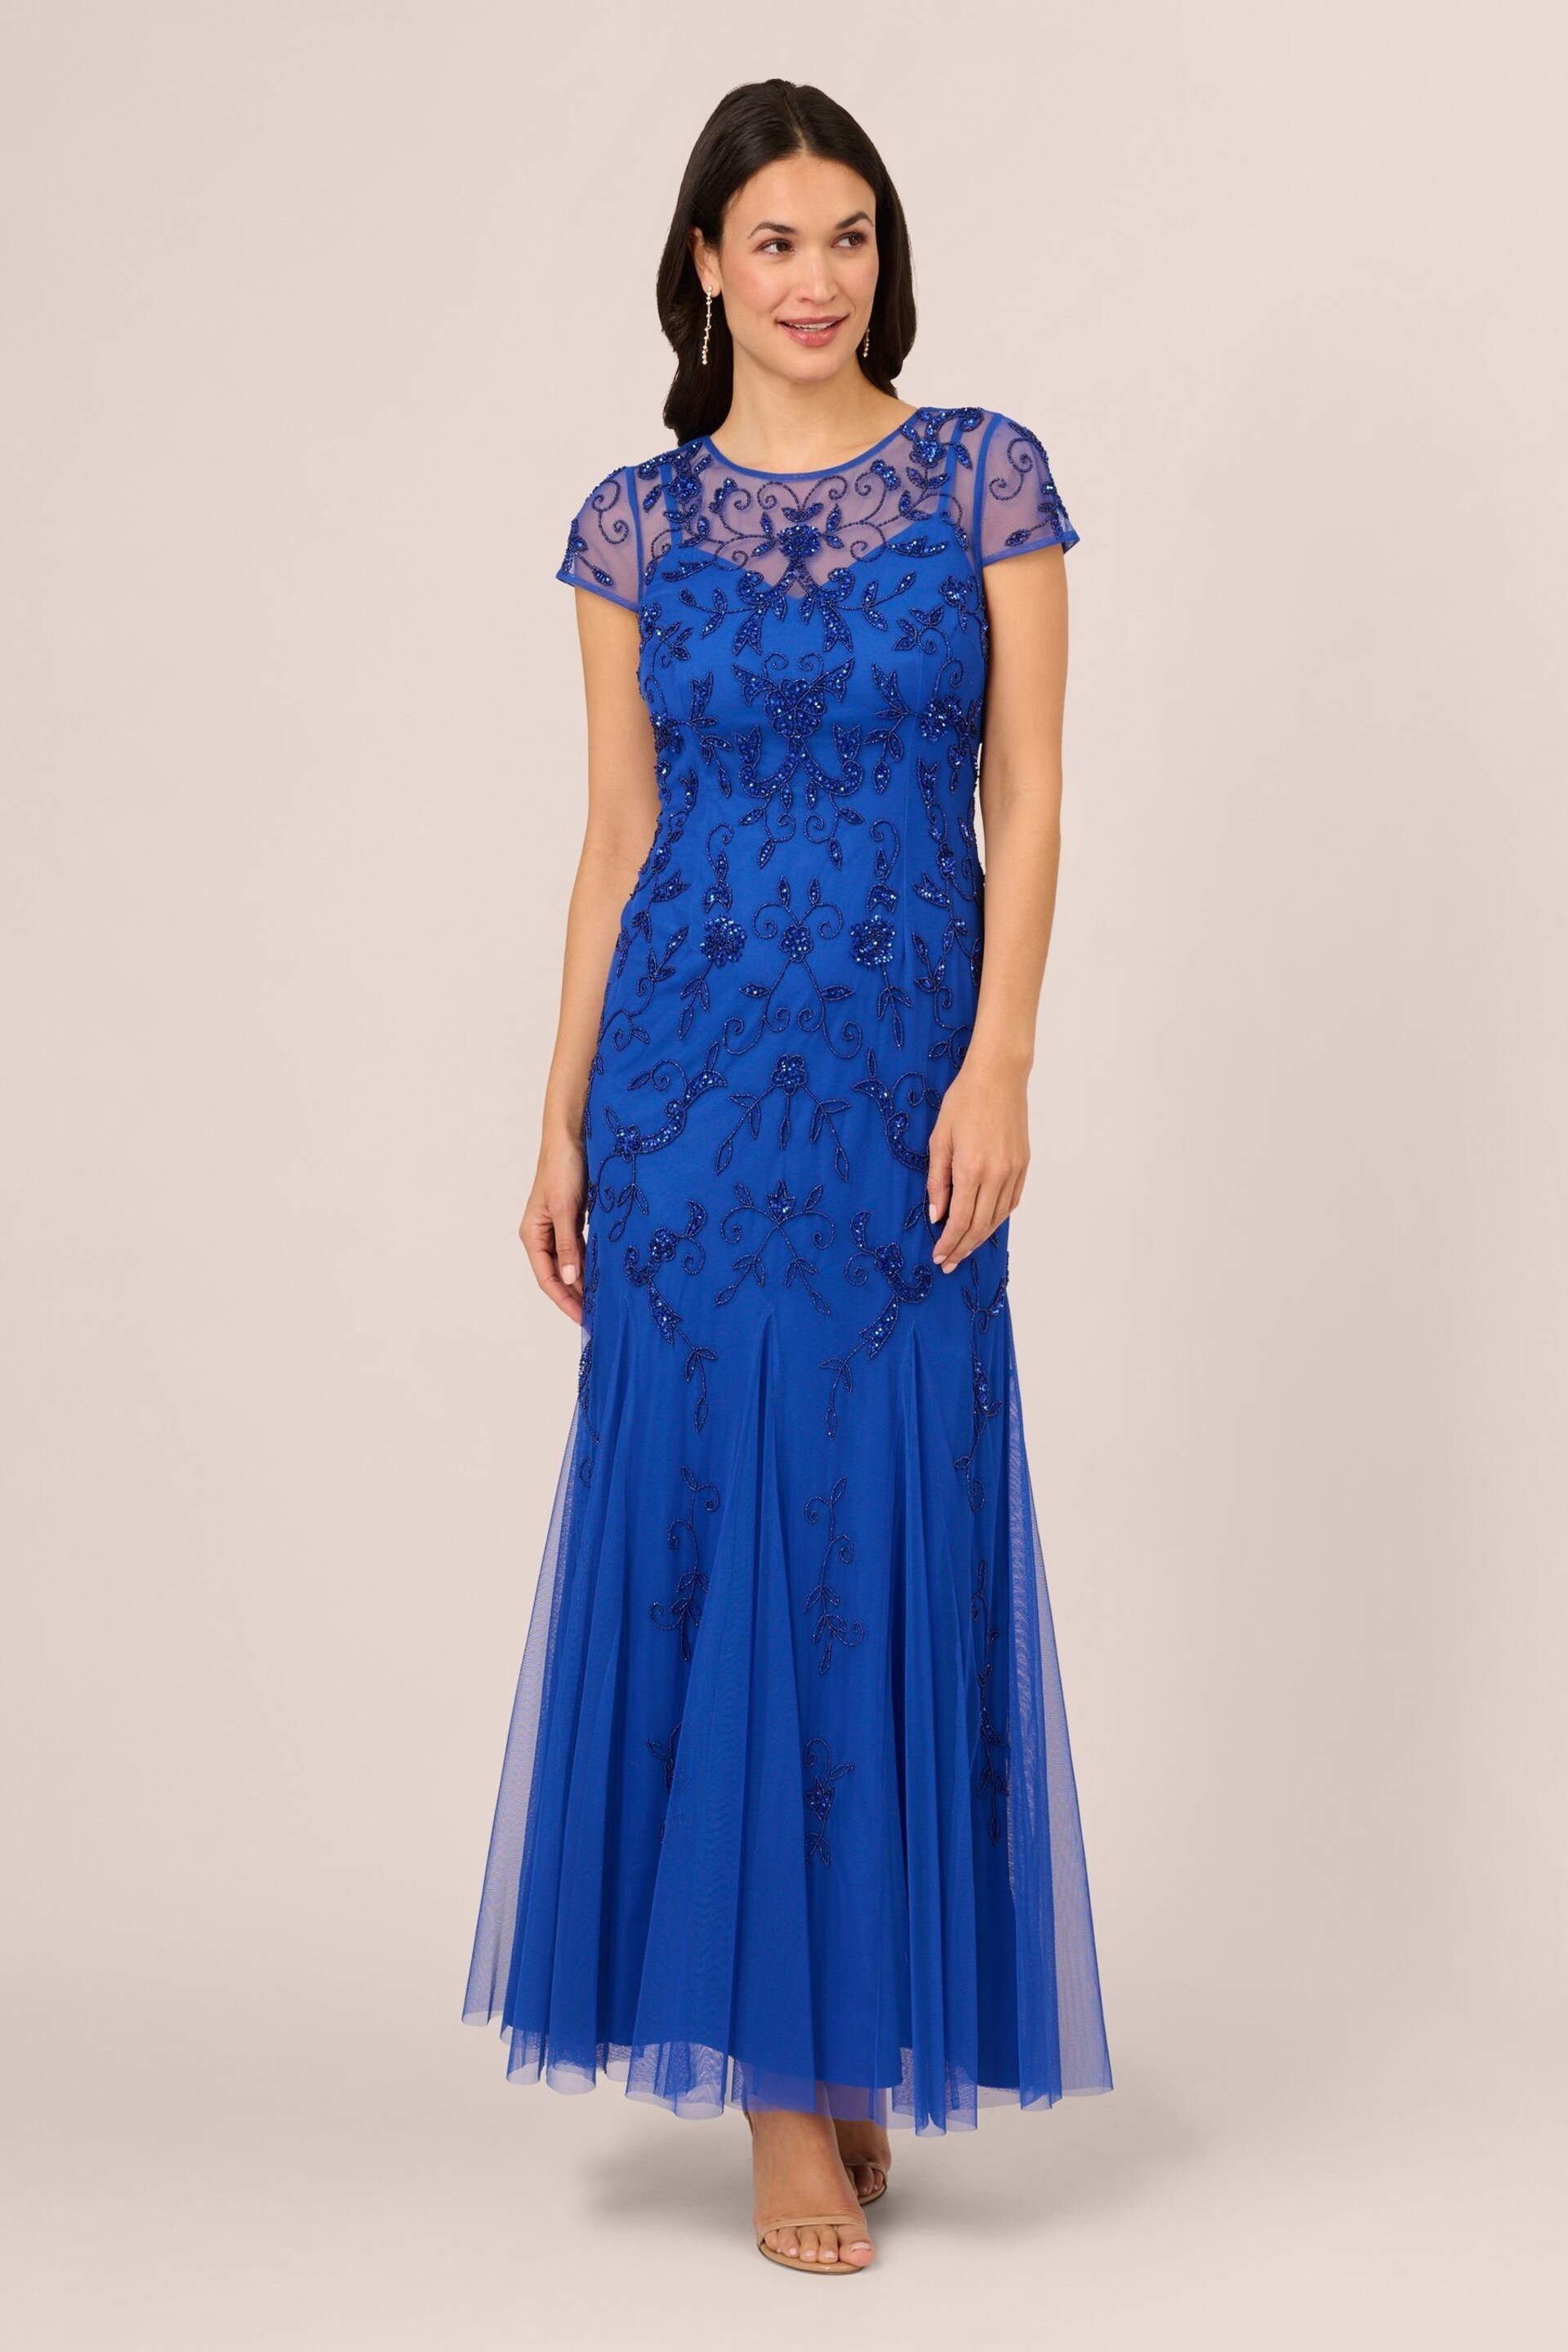 Adrianna Papell Blue Studio Bead Mesh Godet Gown - Image 1 of 7